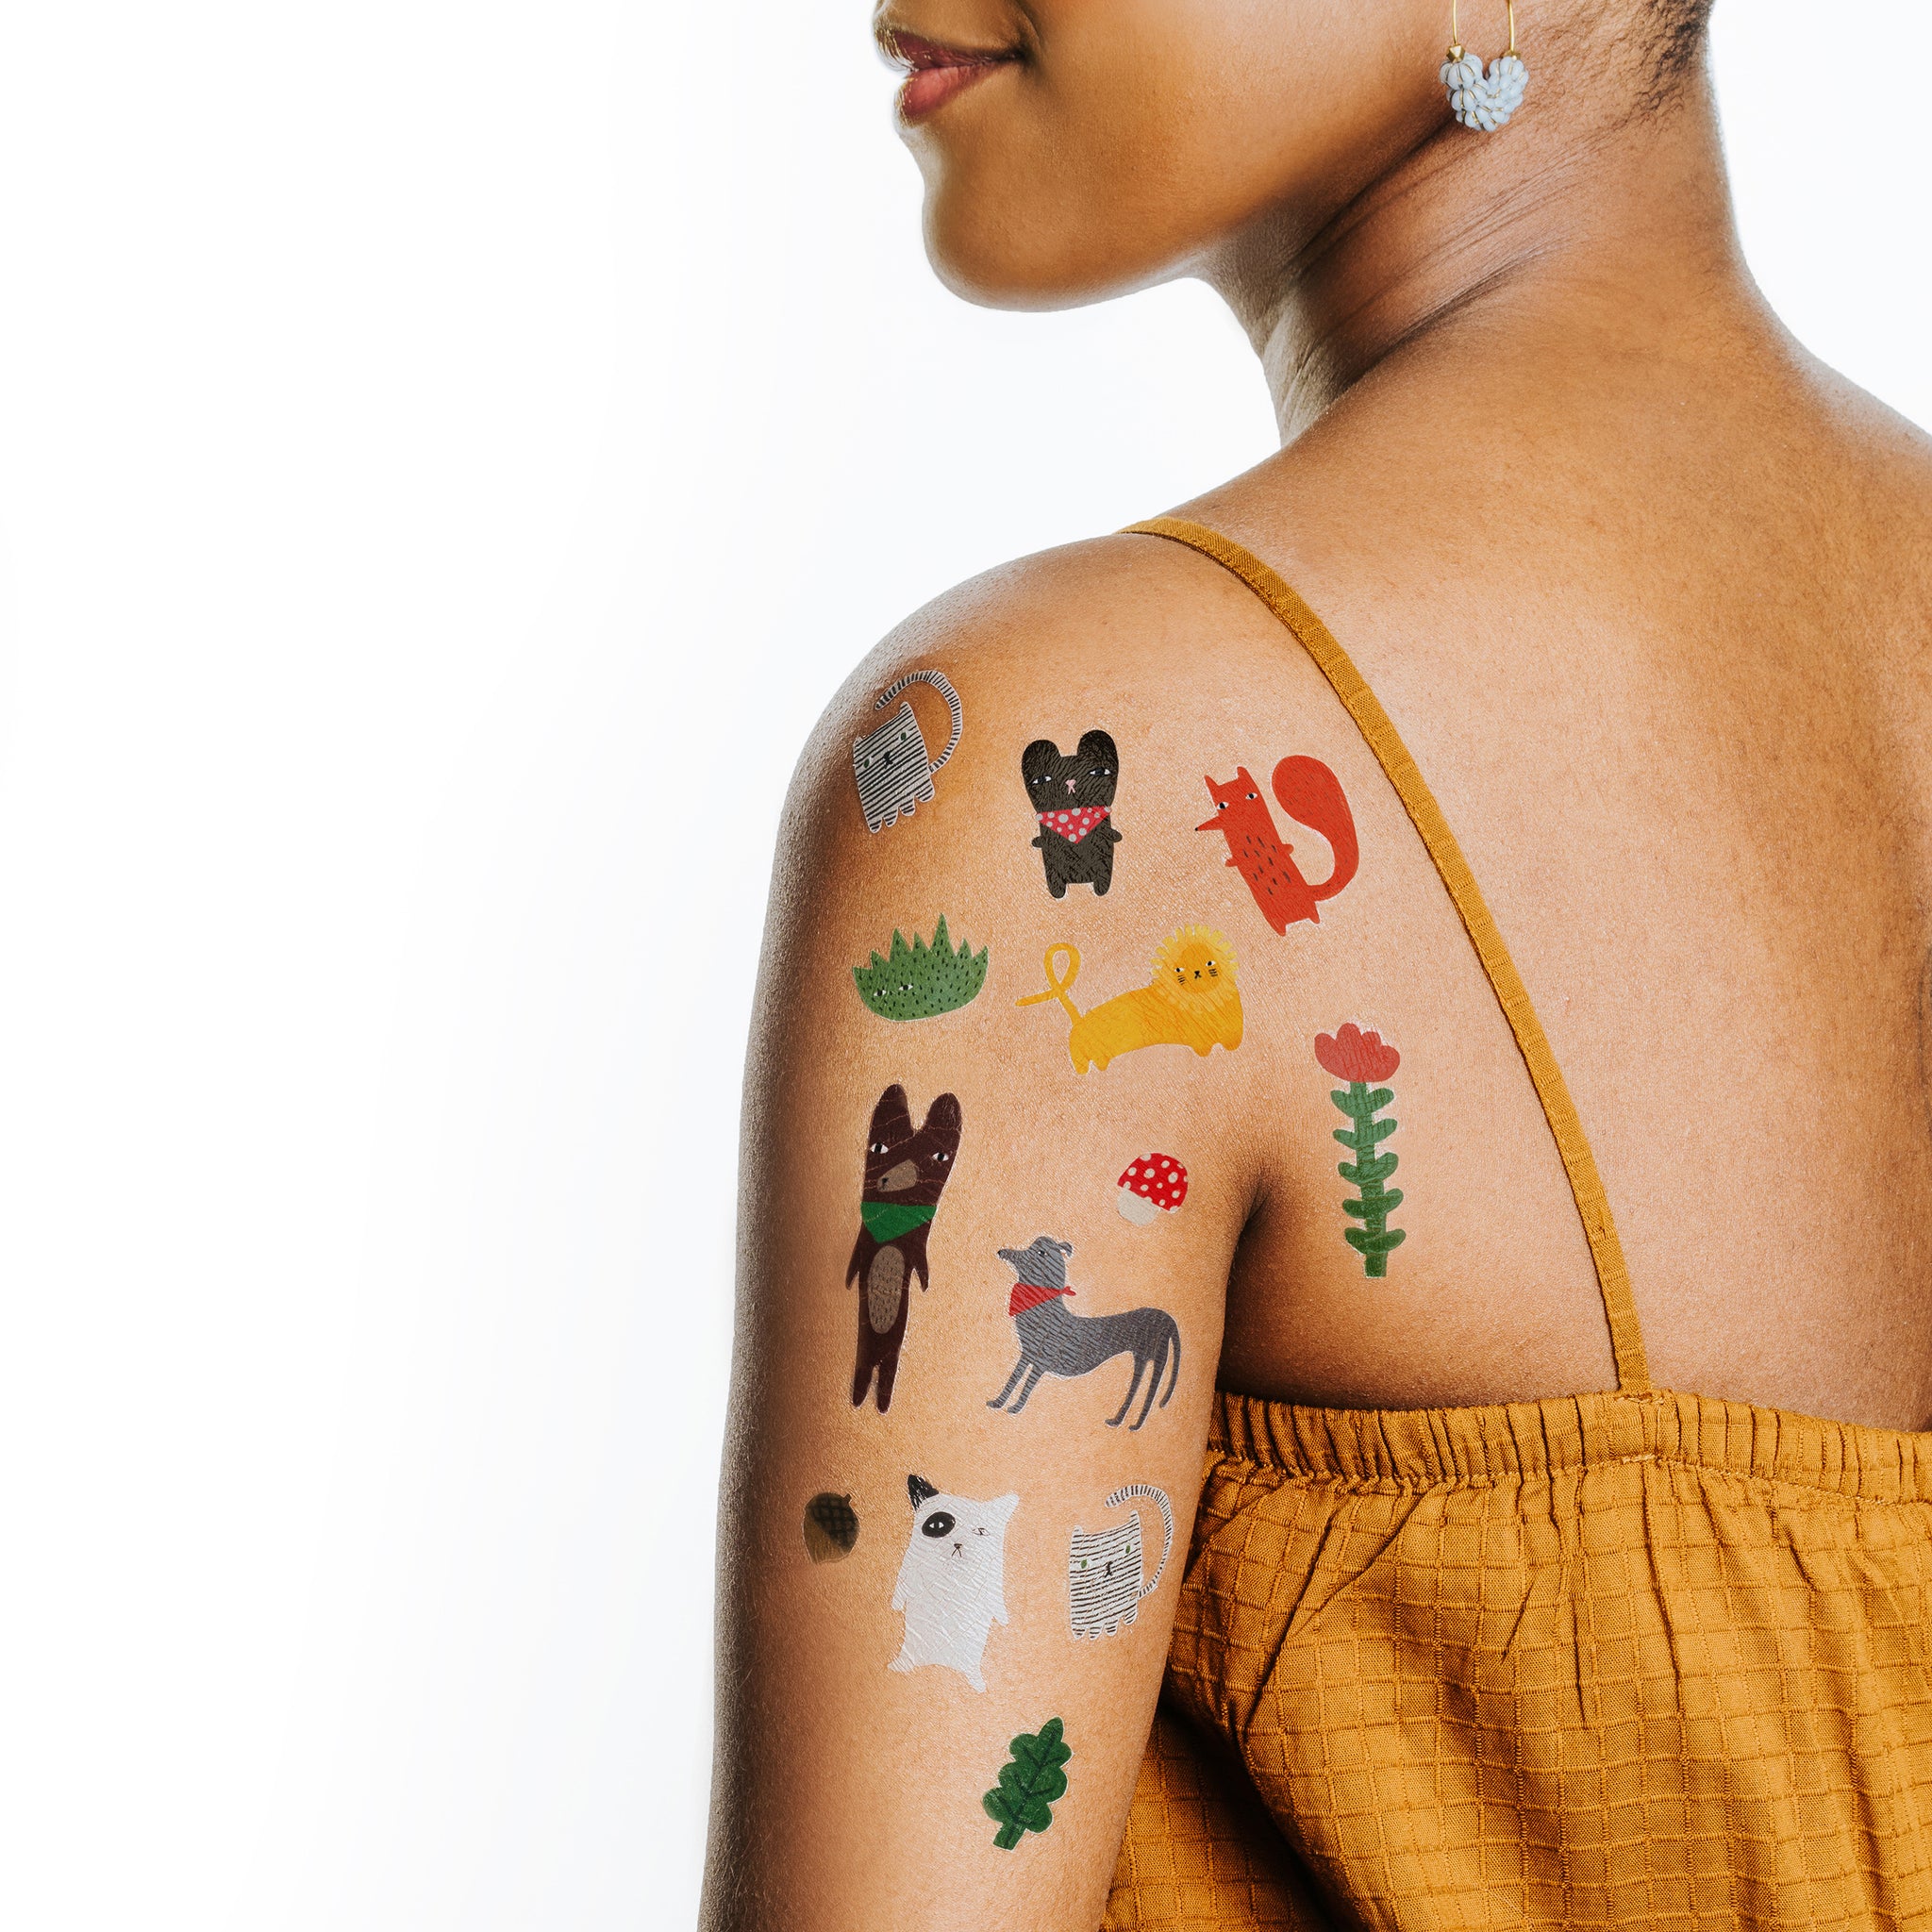 How to Use Temporary Tattoo Stickers – Sissi Tattoo Studio